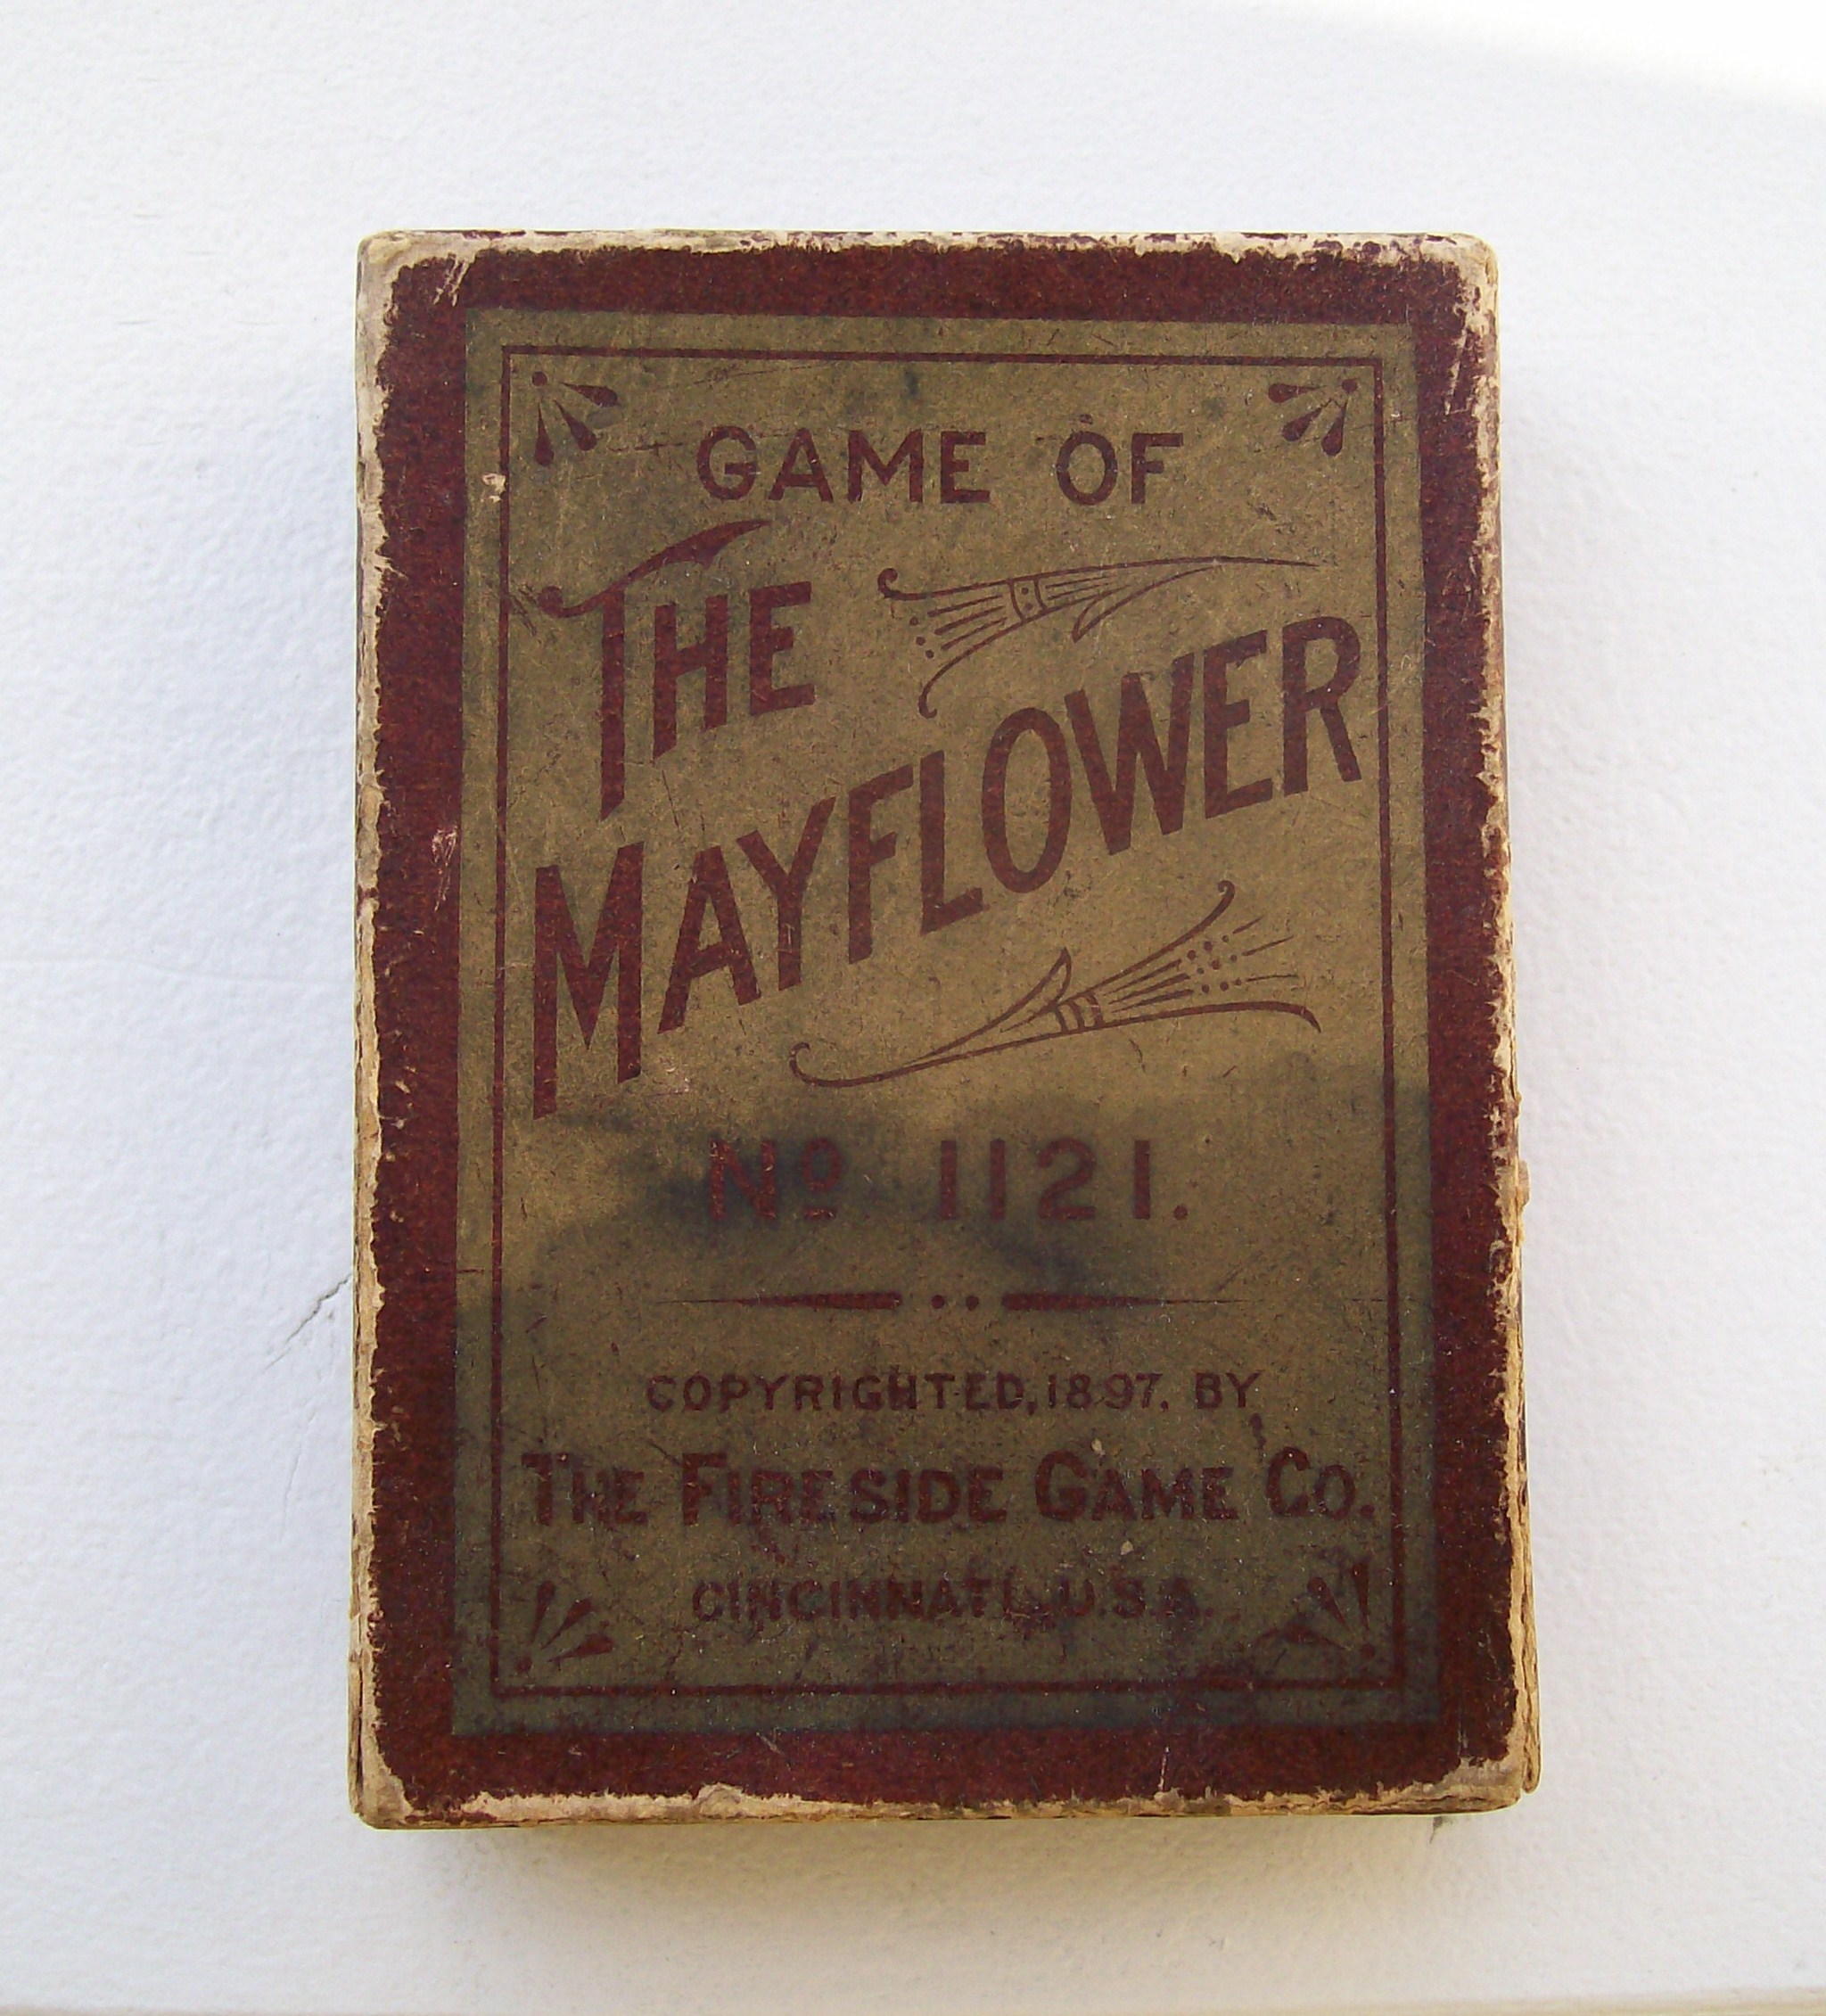 Old game Card. Collectible Card game. The Card is historical.